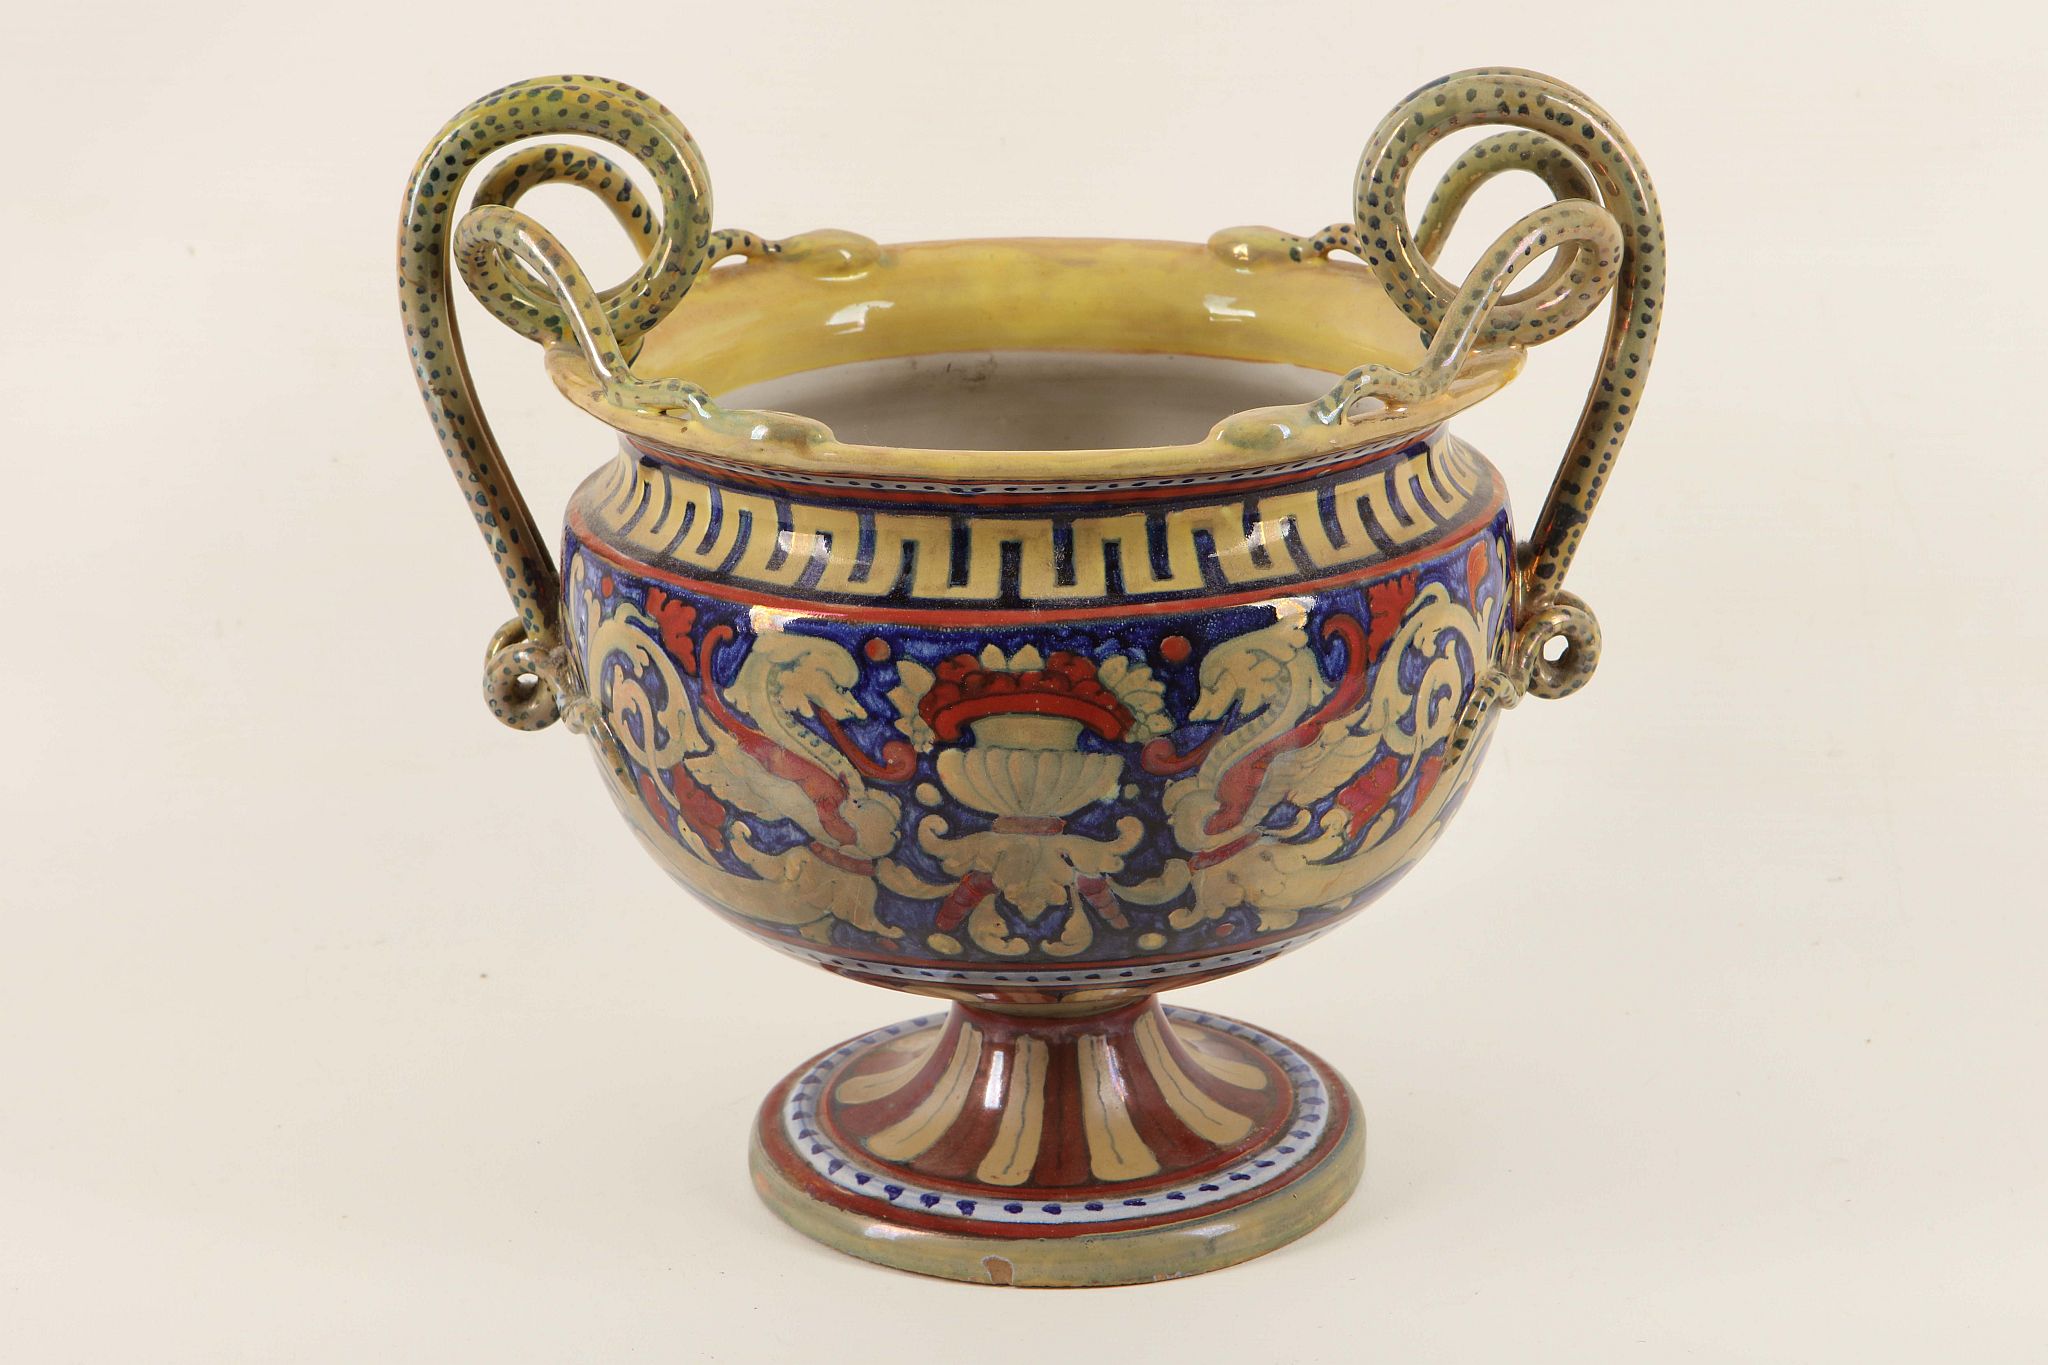 A 19th Century Italian majolica vase with twin snake handles, decorated in lustrous glazes in